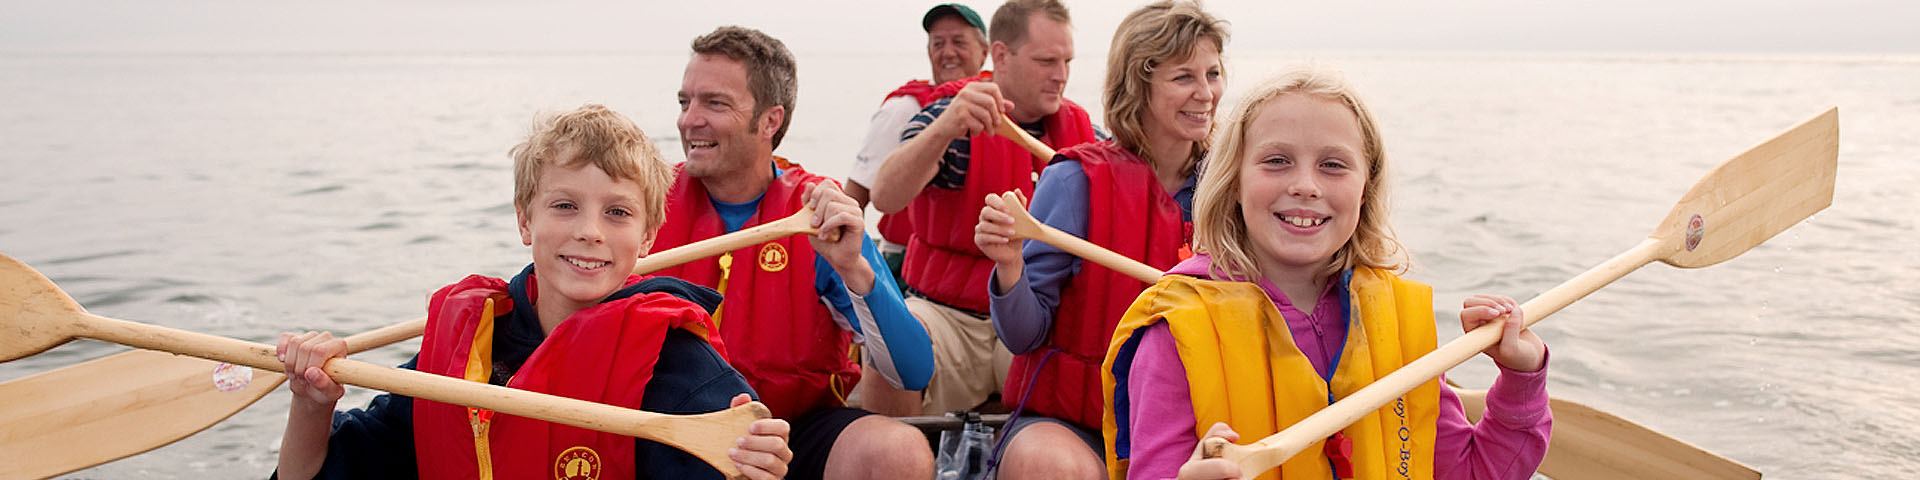 A group of people in a large canoe wearing safety vests and holding paddles.